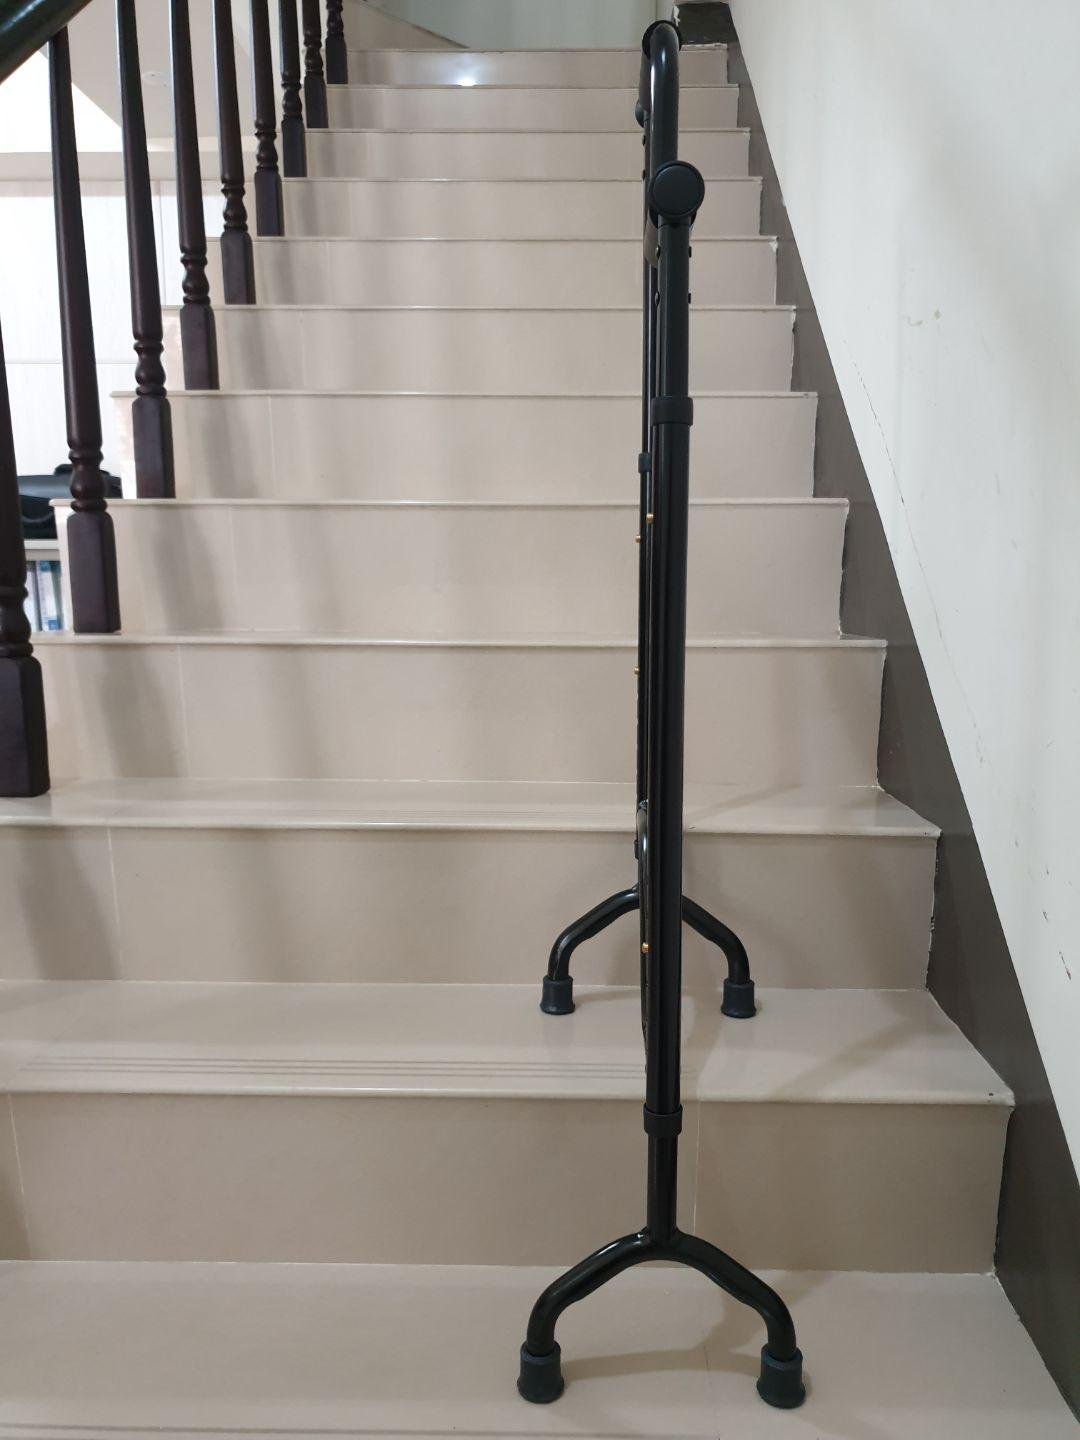 Stair Assist Cane, Cane for Stairs, Cane on Stairs, Going Upstairs Cane 3